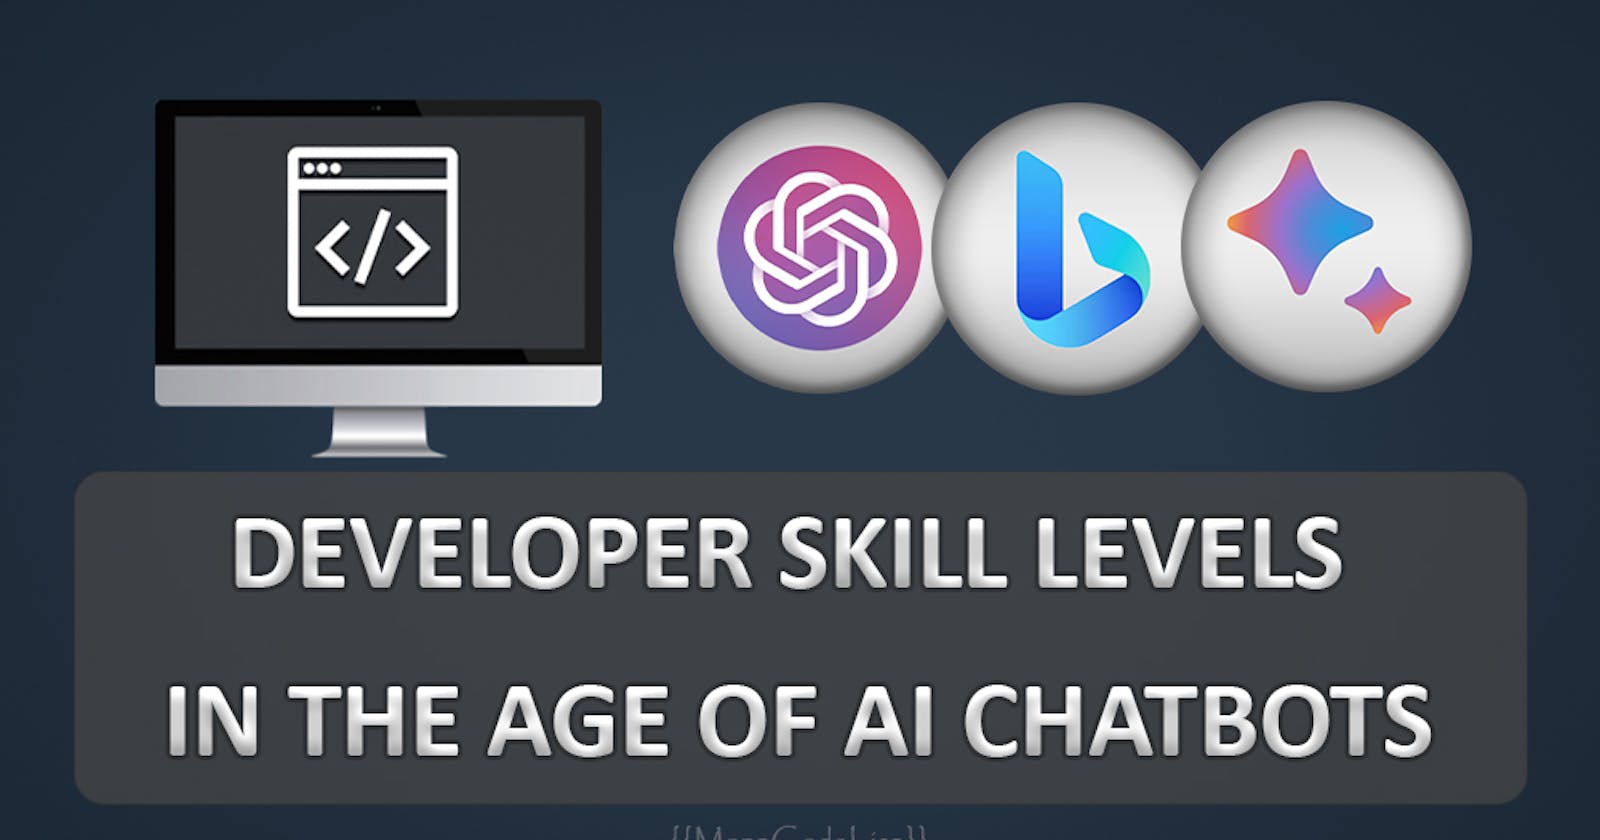 Measuring Developer Skill Levels in the Age of AI Chatbots